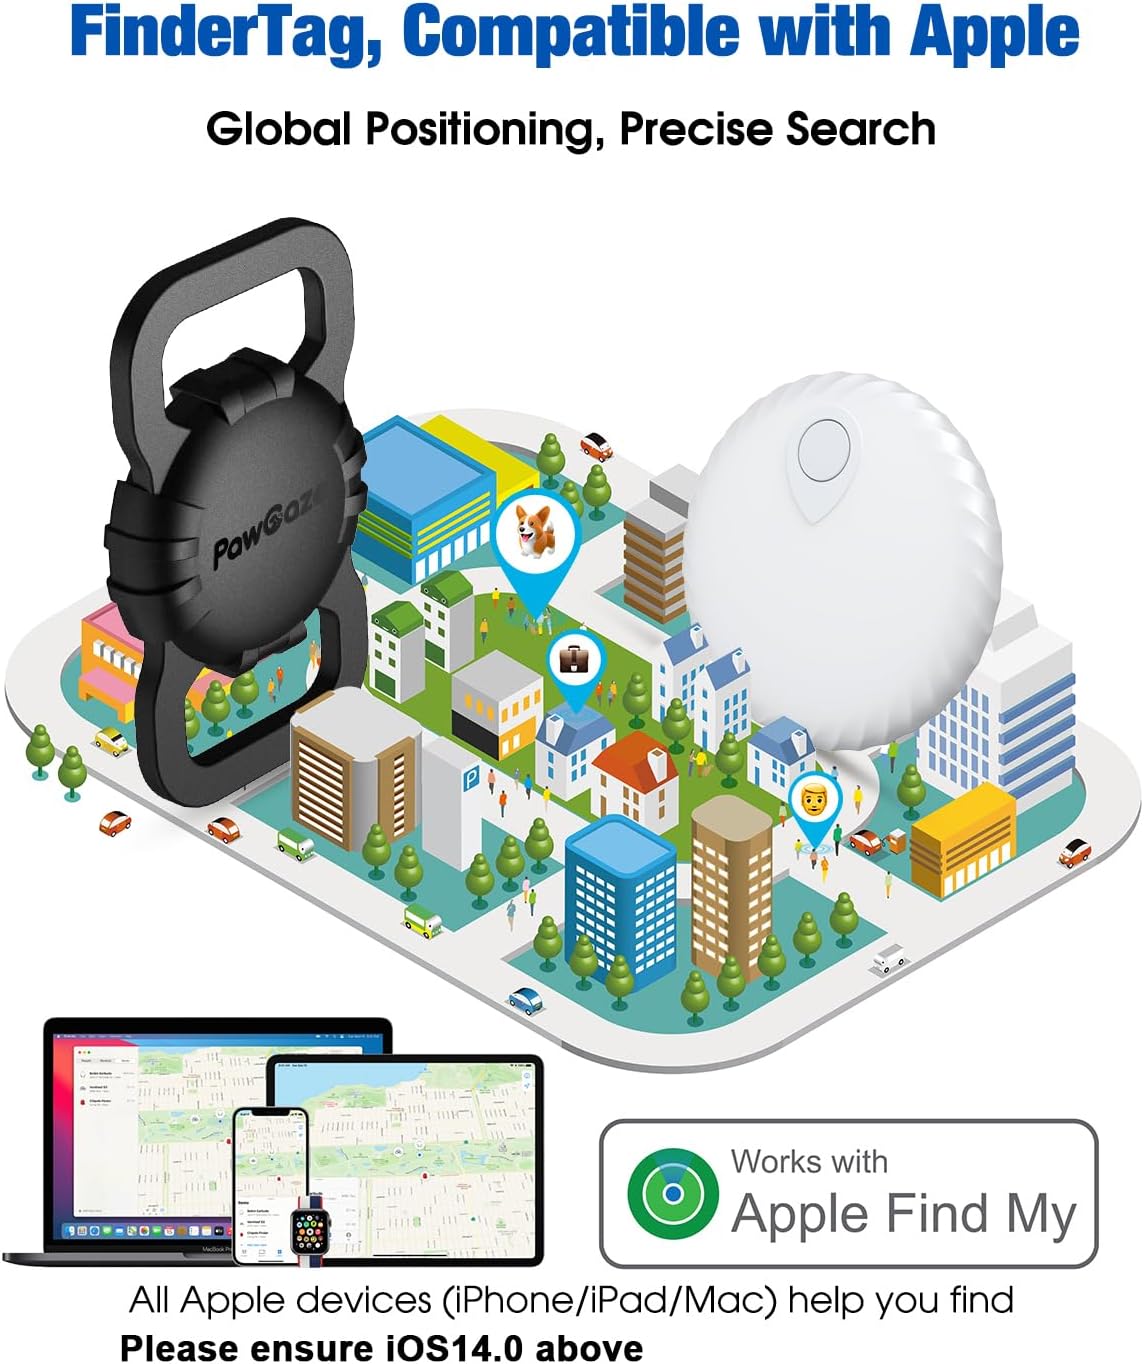 PawGaze GPS Tracker Compatible with Apple iOS FindMy App, Anti-Lost Tracking Device FinderTag for Dogs, Cats, Pets, Luggage, Items, with Silicone Cover for Pets Collars/School Bag Straps